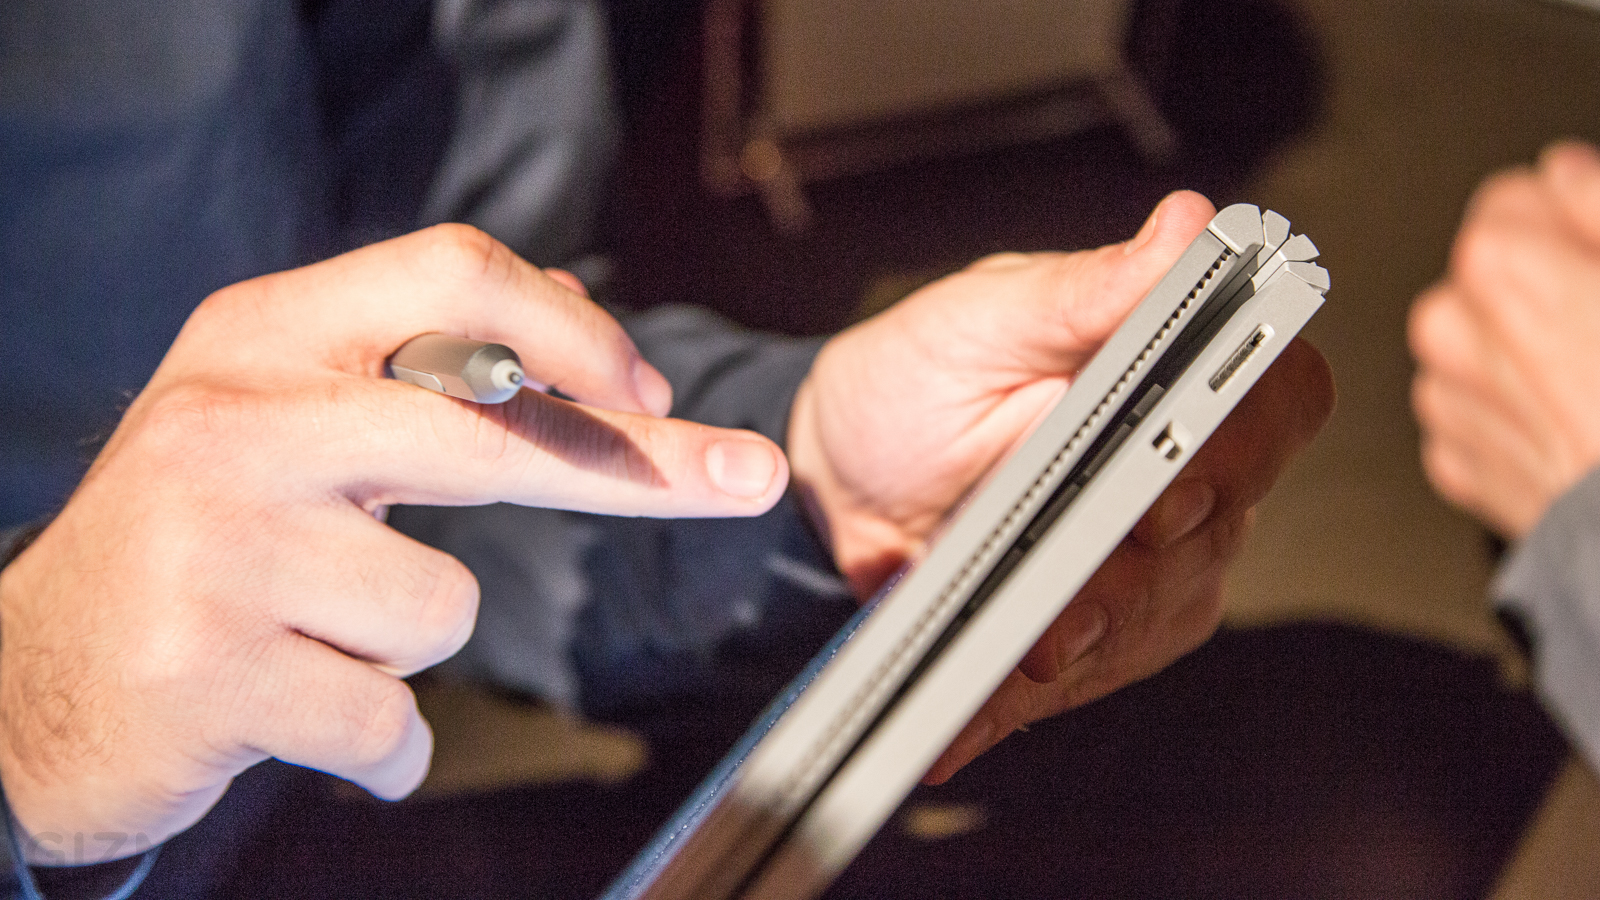 Surface Book Hands-On: Towards A More Perfect Laptop